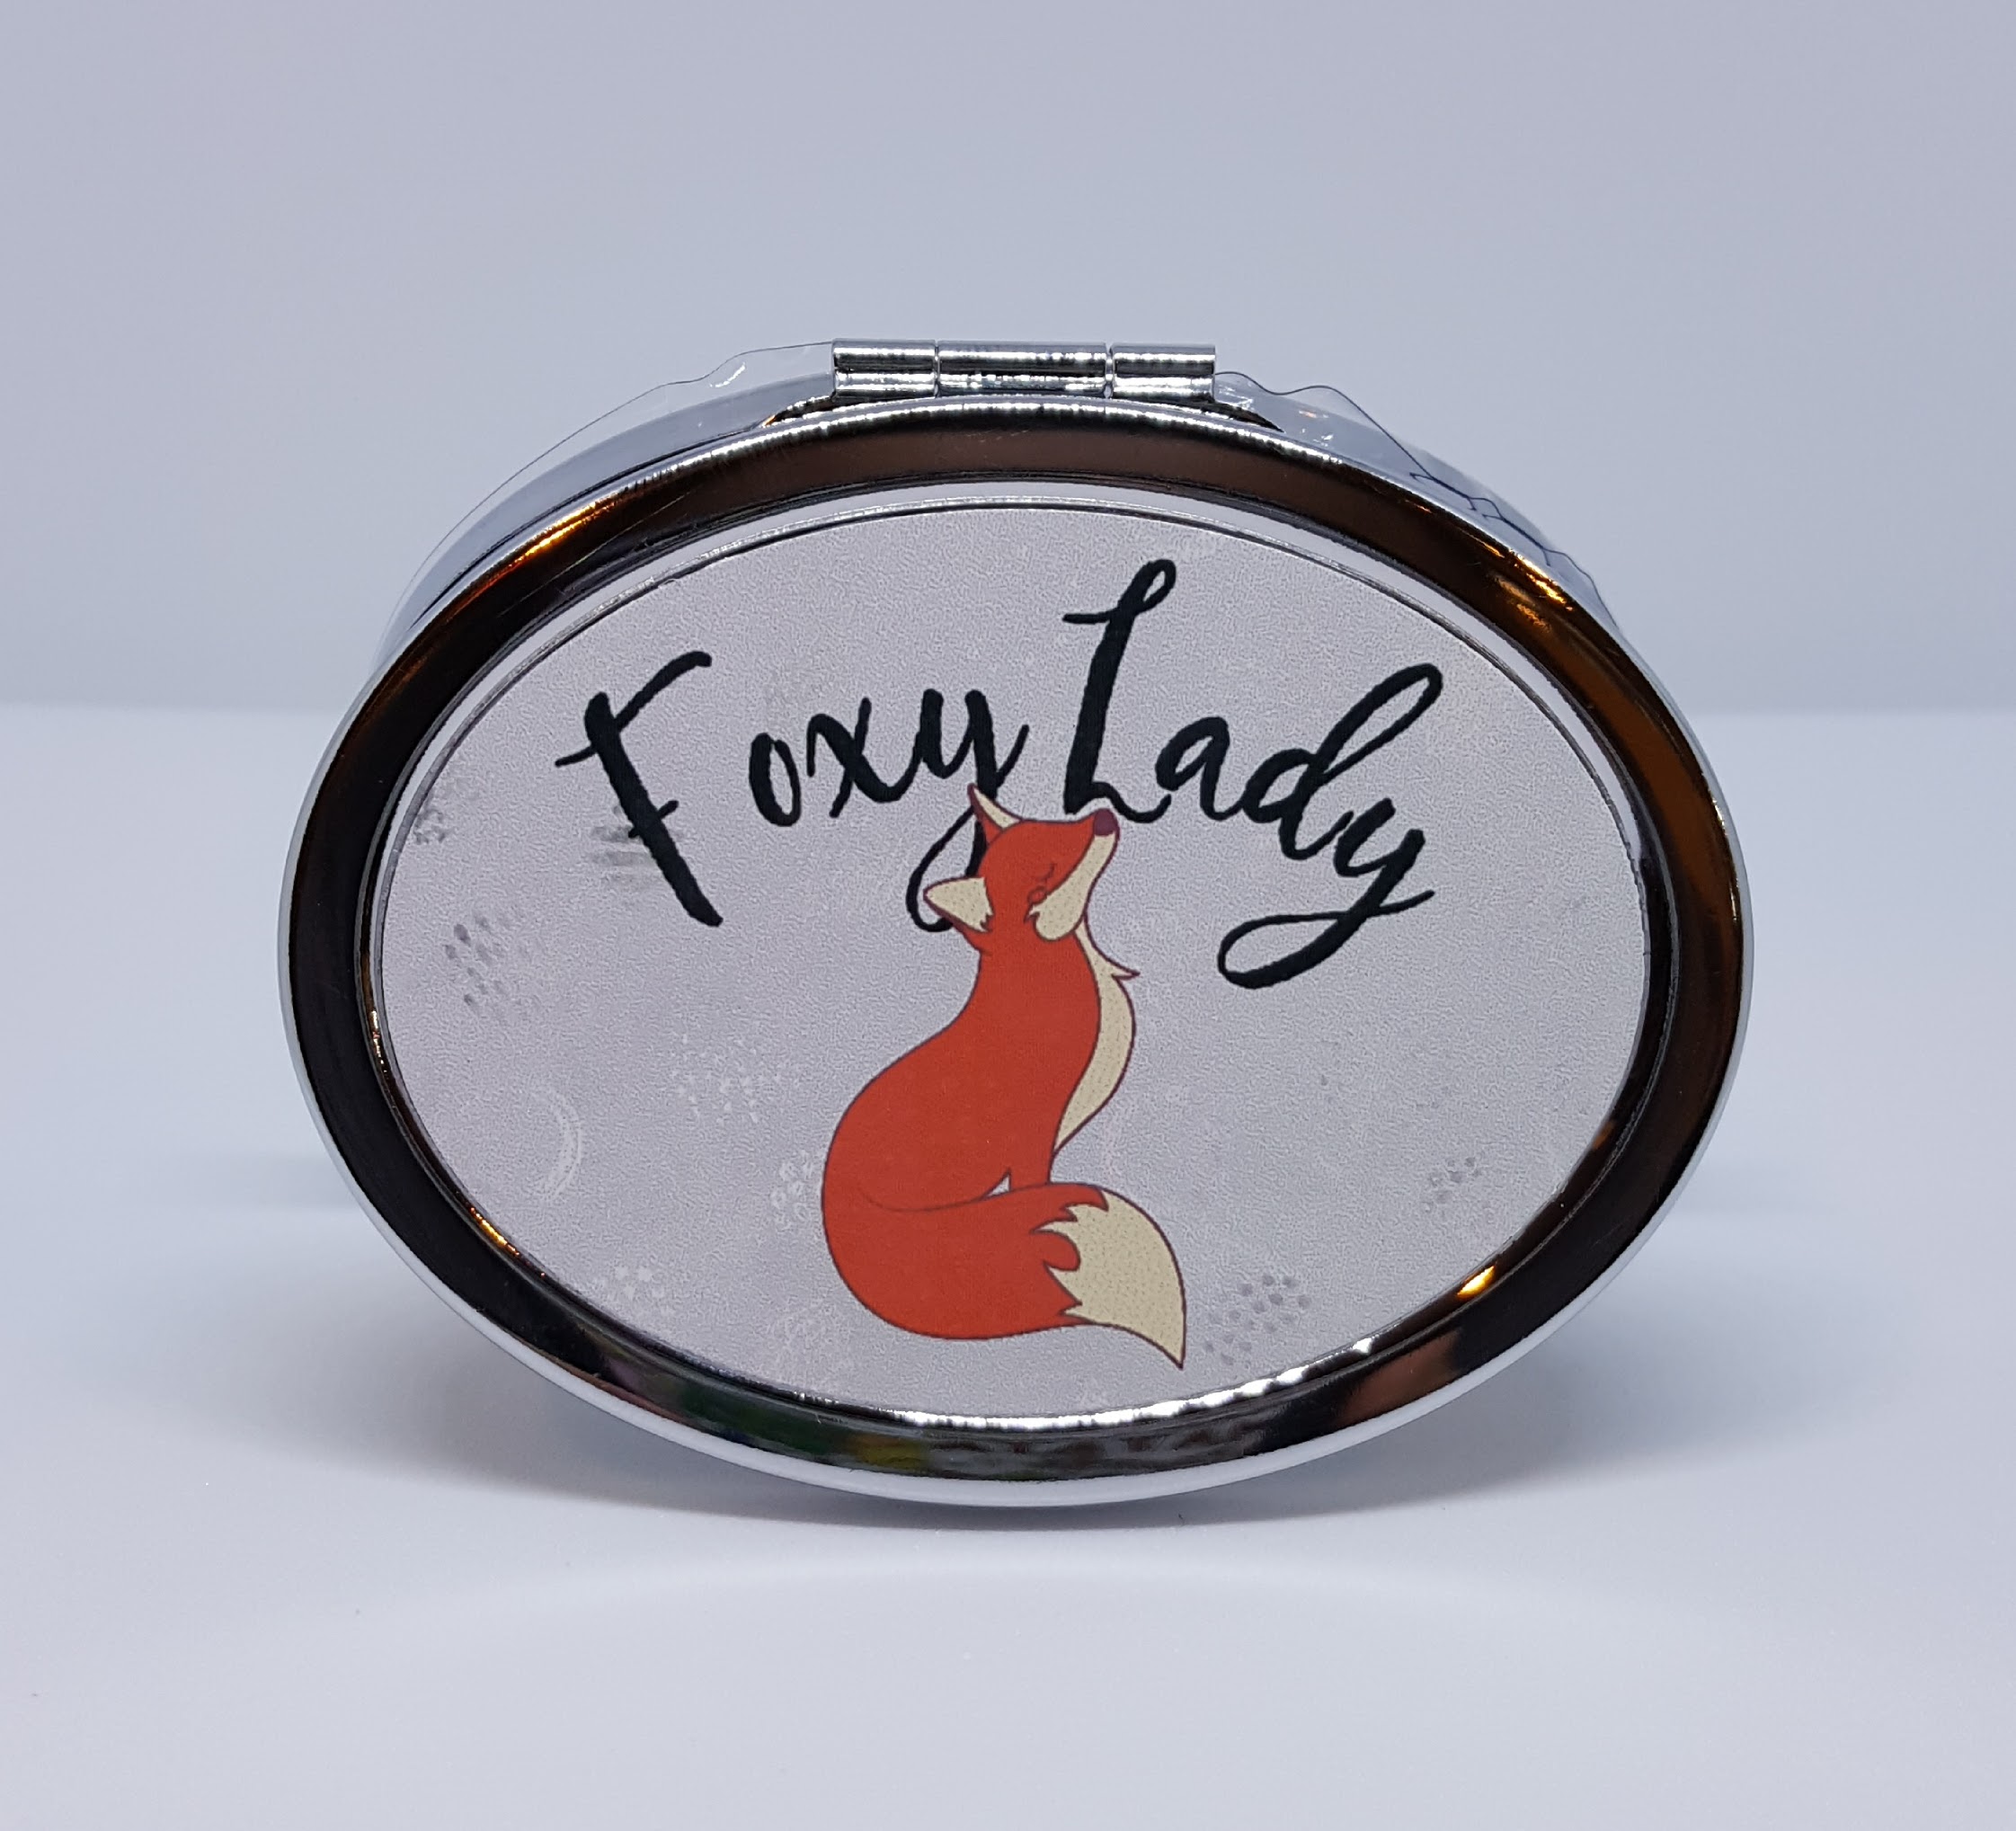 Mirror Compact made with sublimation printing